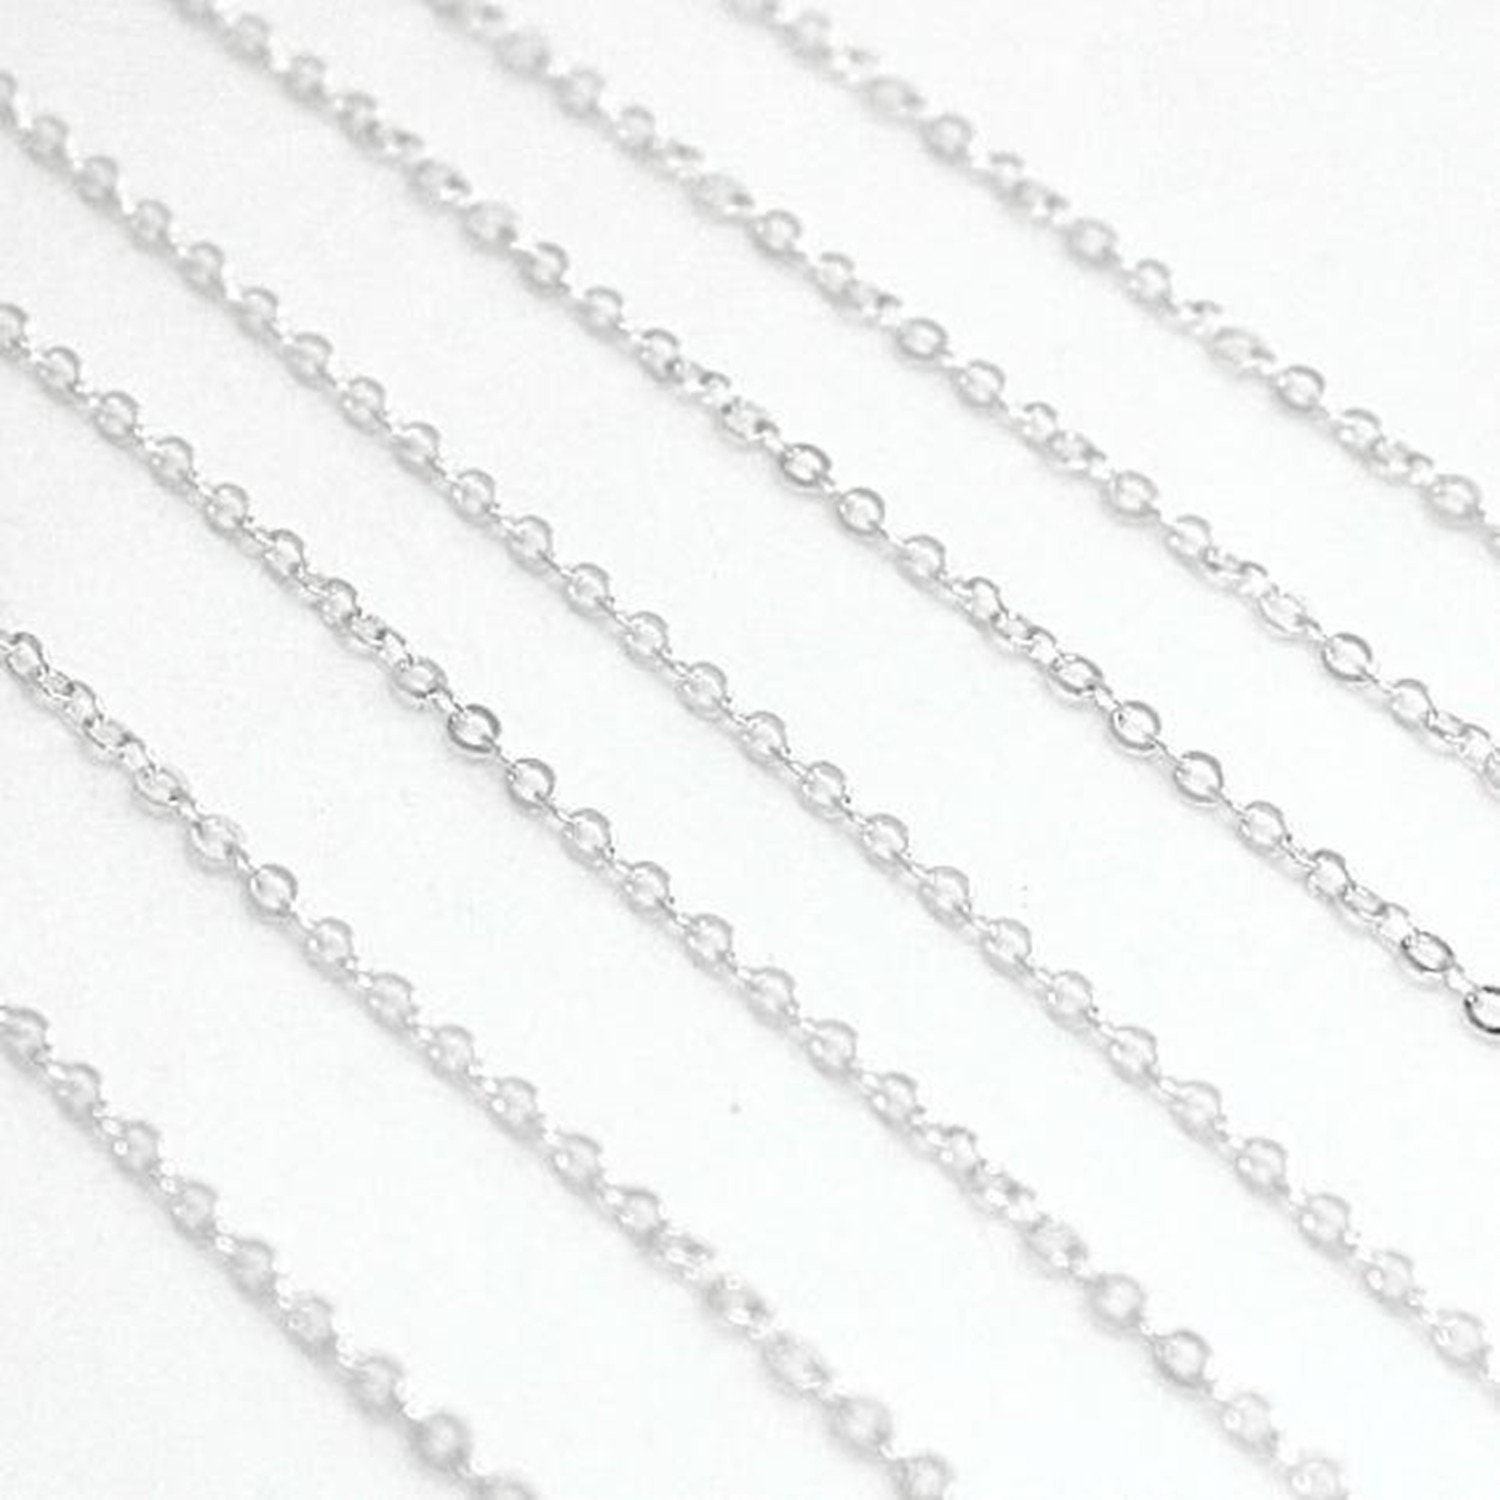 SANNIX 50 Pack Silver Plated Necklace Chains Bulk, Cable Chain